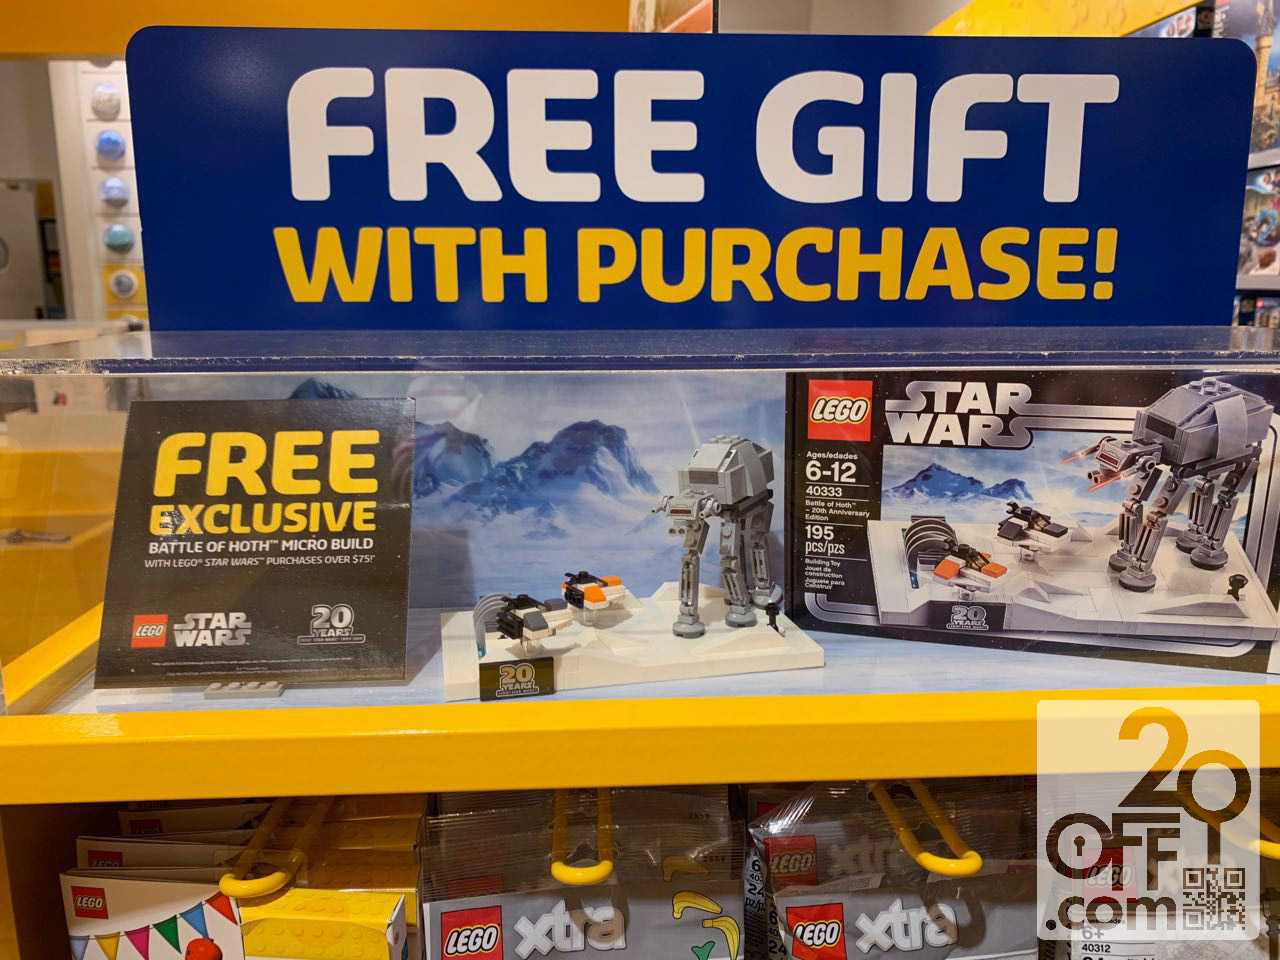 LEGO Free Gift Offer